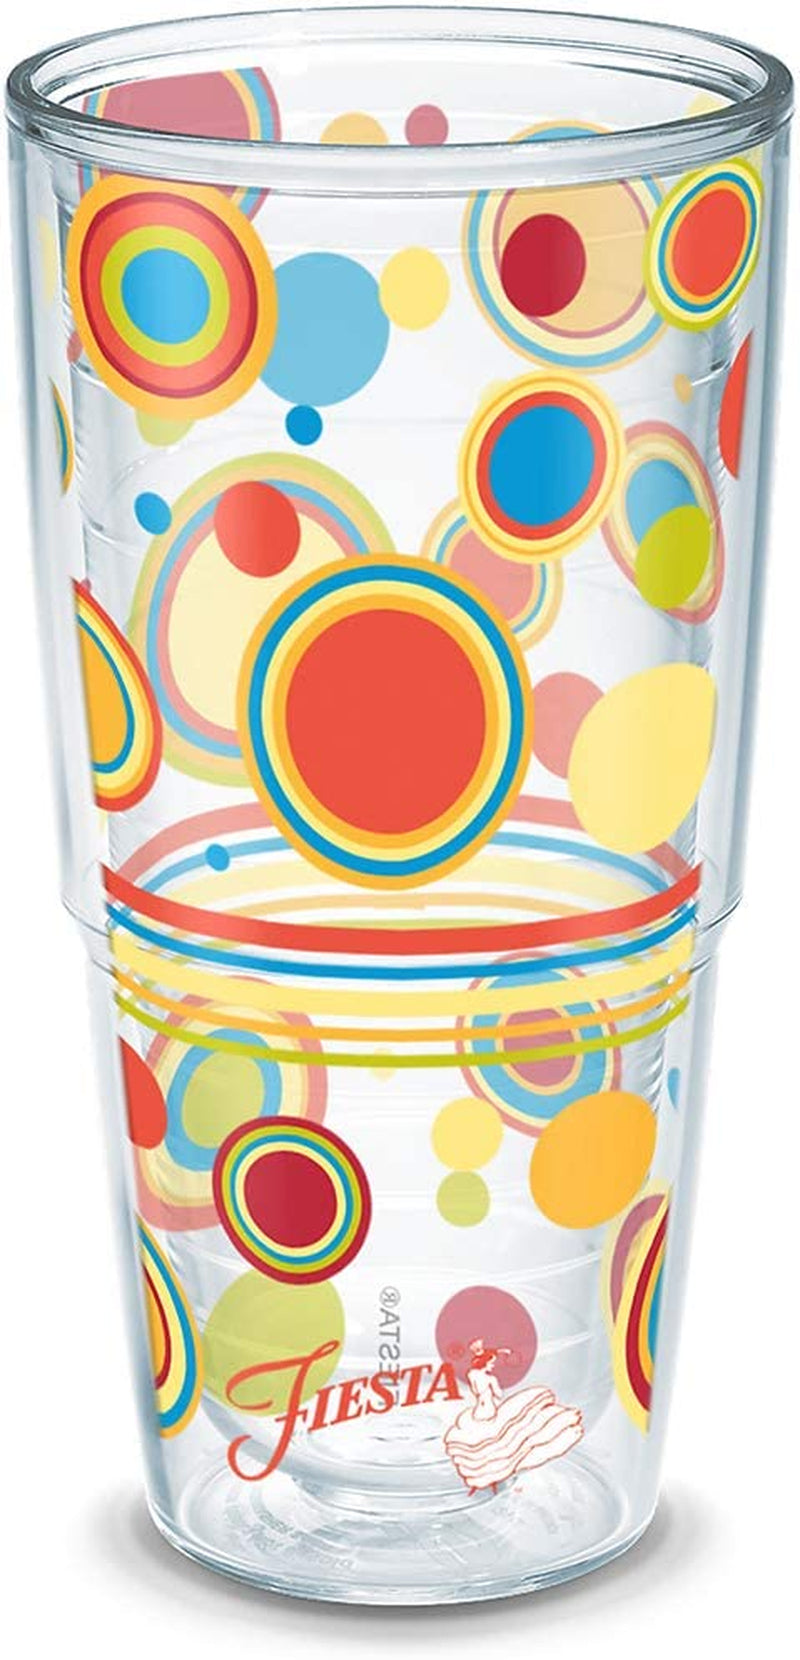 Tervis Made in USA Double Walled Fiesta Insulated Tumbler Cup Keeps Drinks Cold & Hot, 16Oz - 4Pk, Poppy Dots Home & Garden > Kitchen & Dining > Tableware > Drinkware Tervis Classic - Unlidded 24oz 